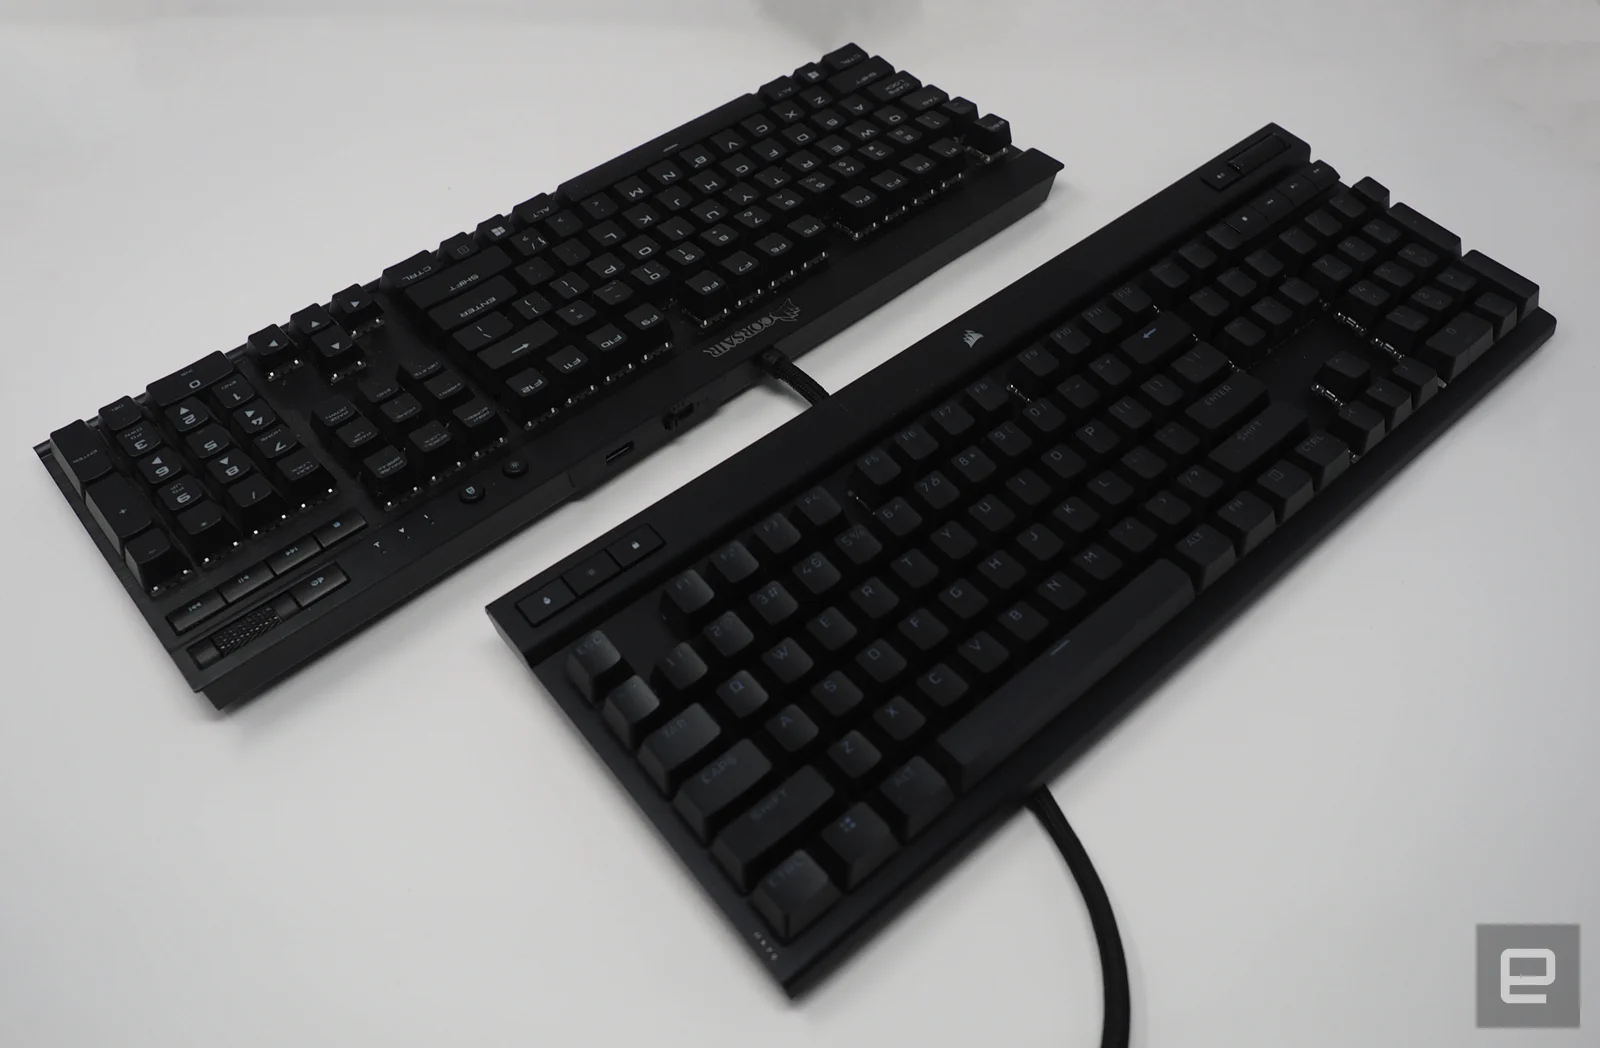 Old K70 on the left, new K70 on the right